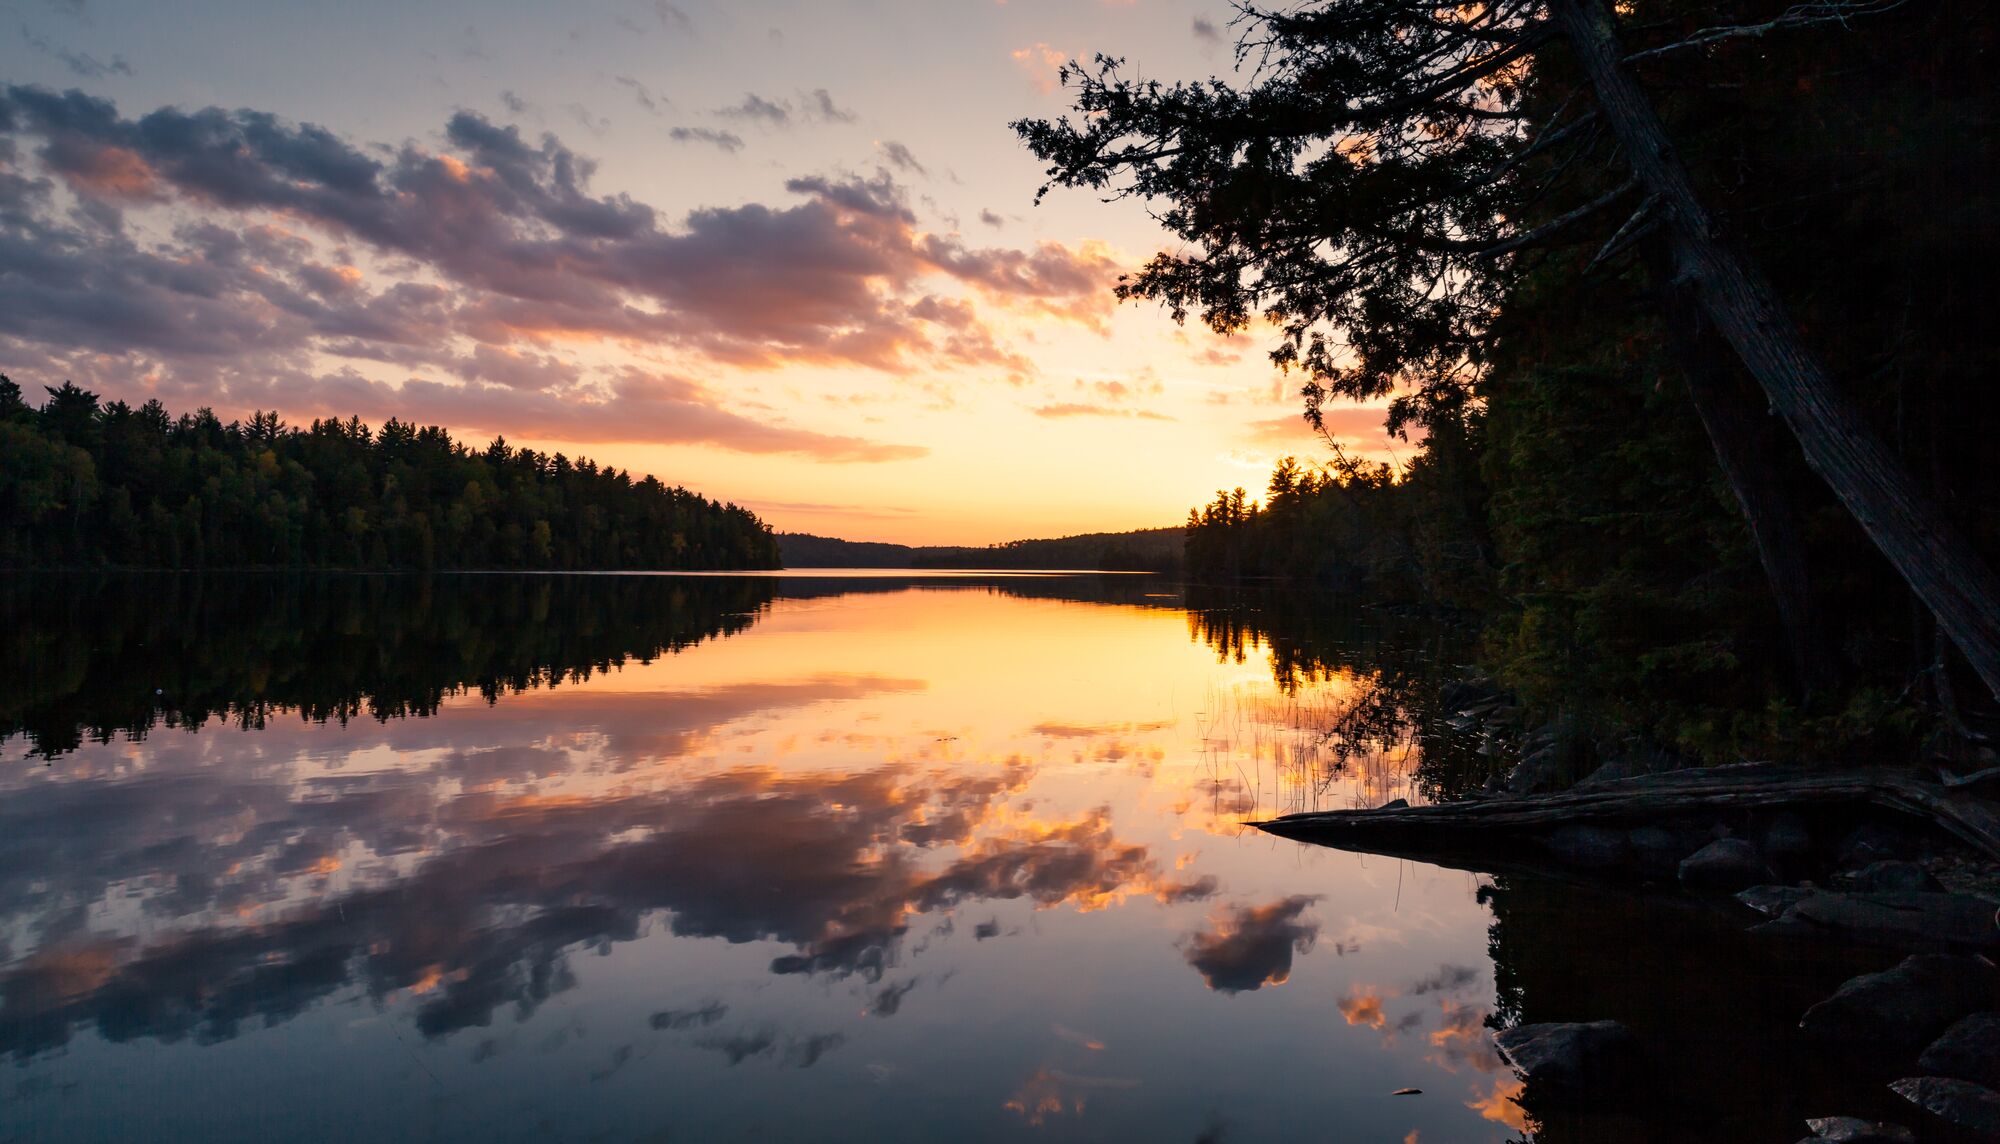 The sun setting over Alder Lake in the Minnesota Boundary Waters Canoe Area